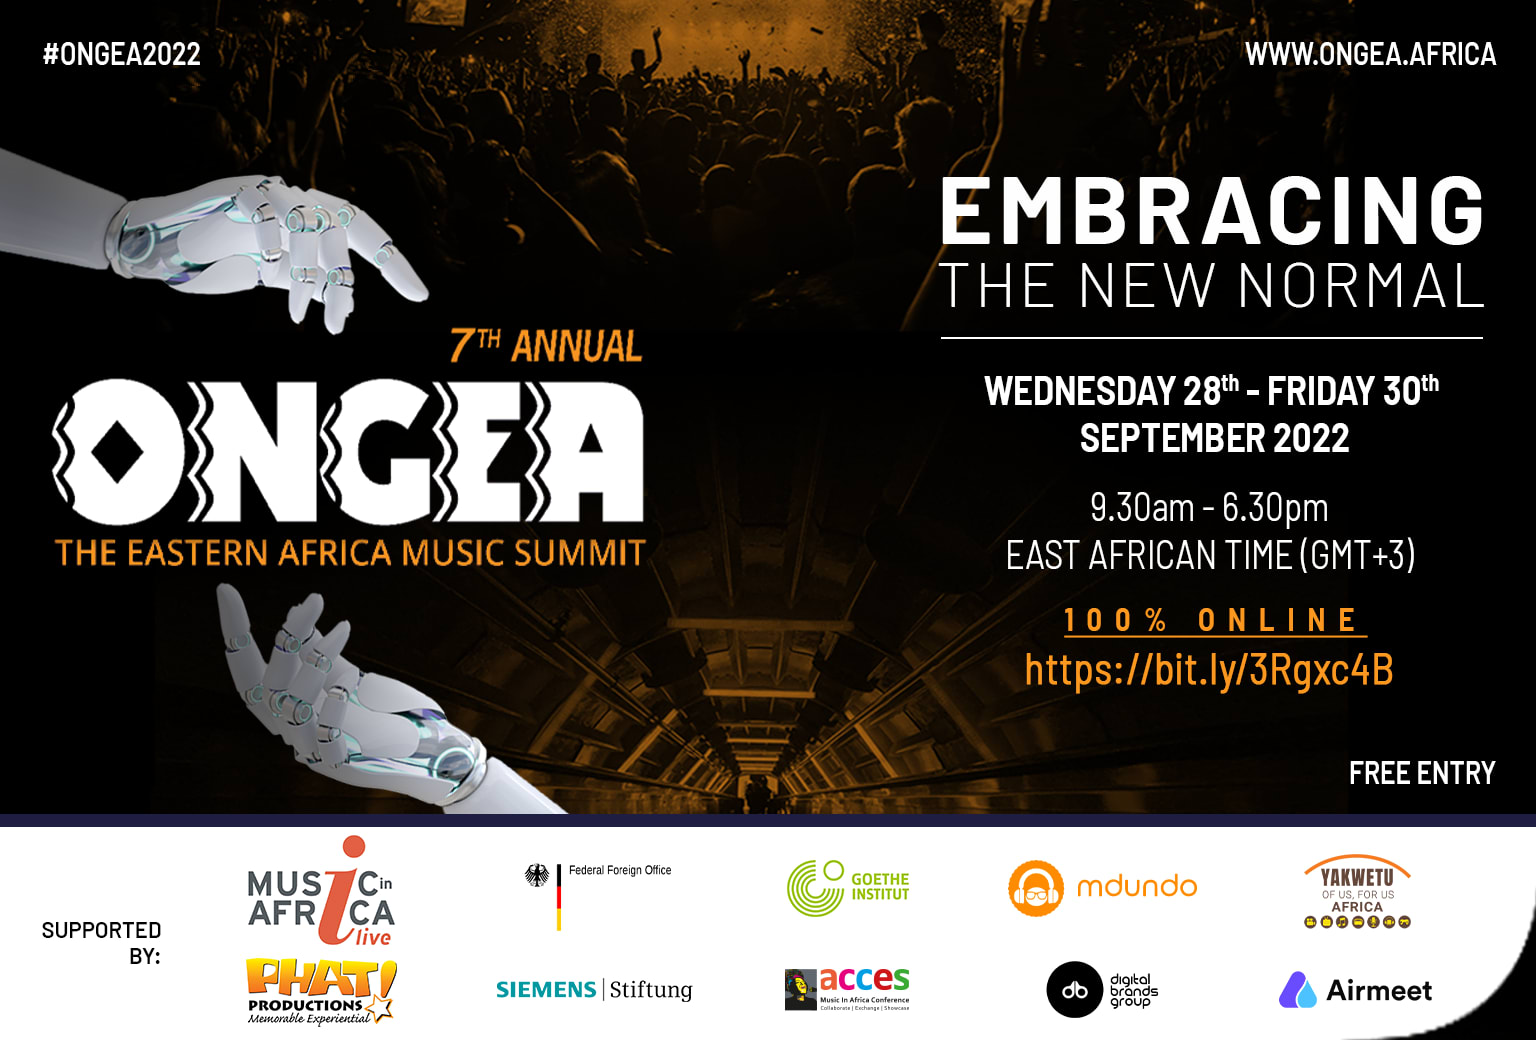 The 7th ONGEA! Eastern Africa Music Summit Poster